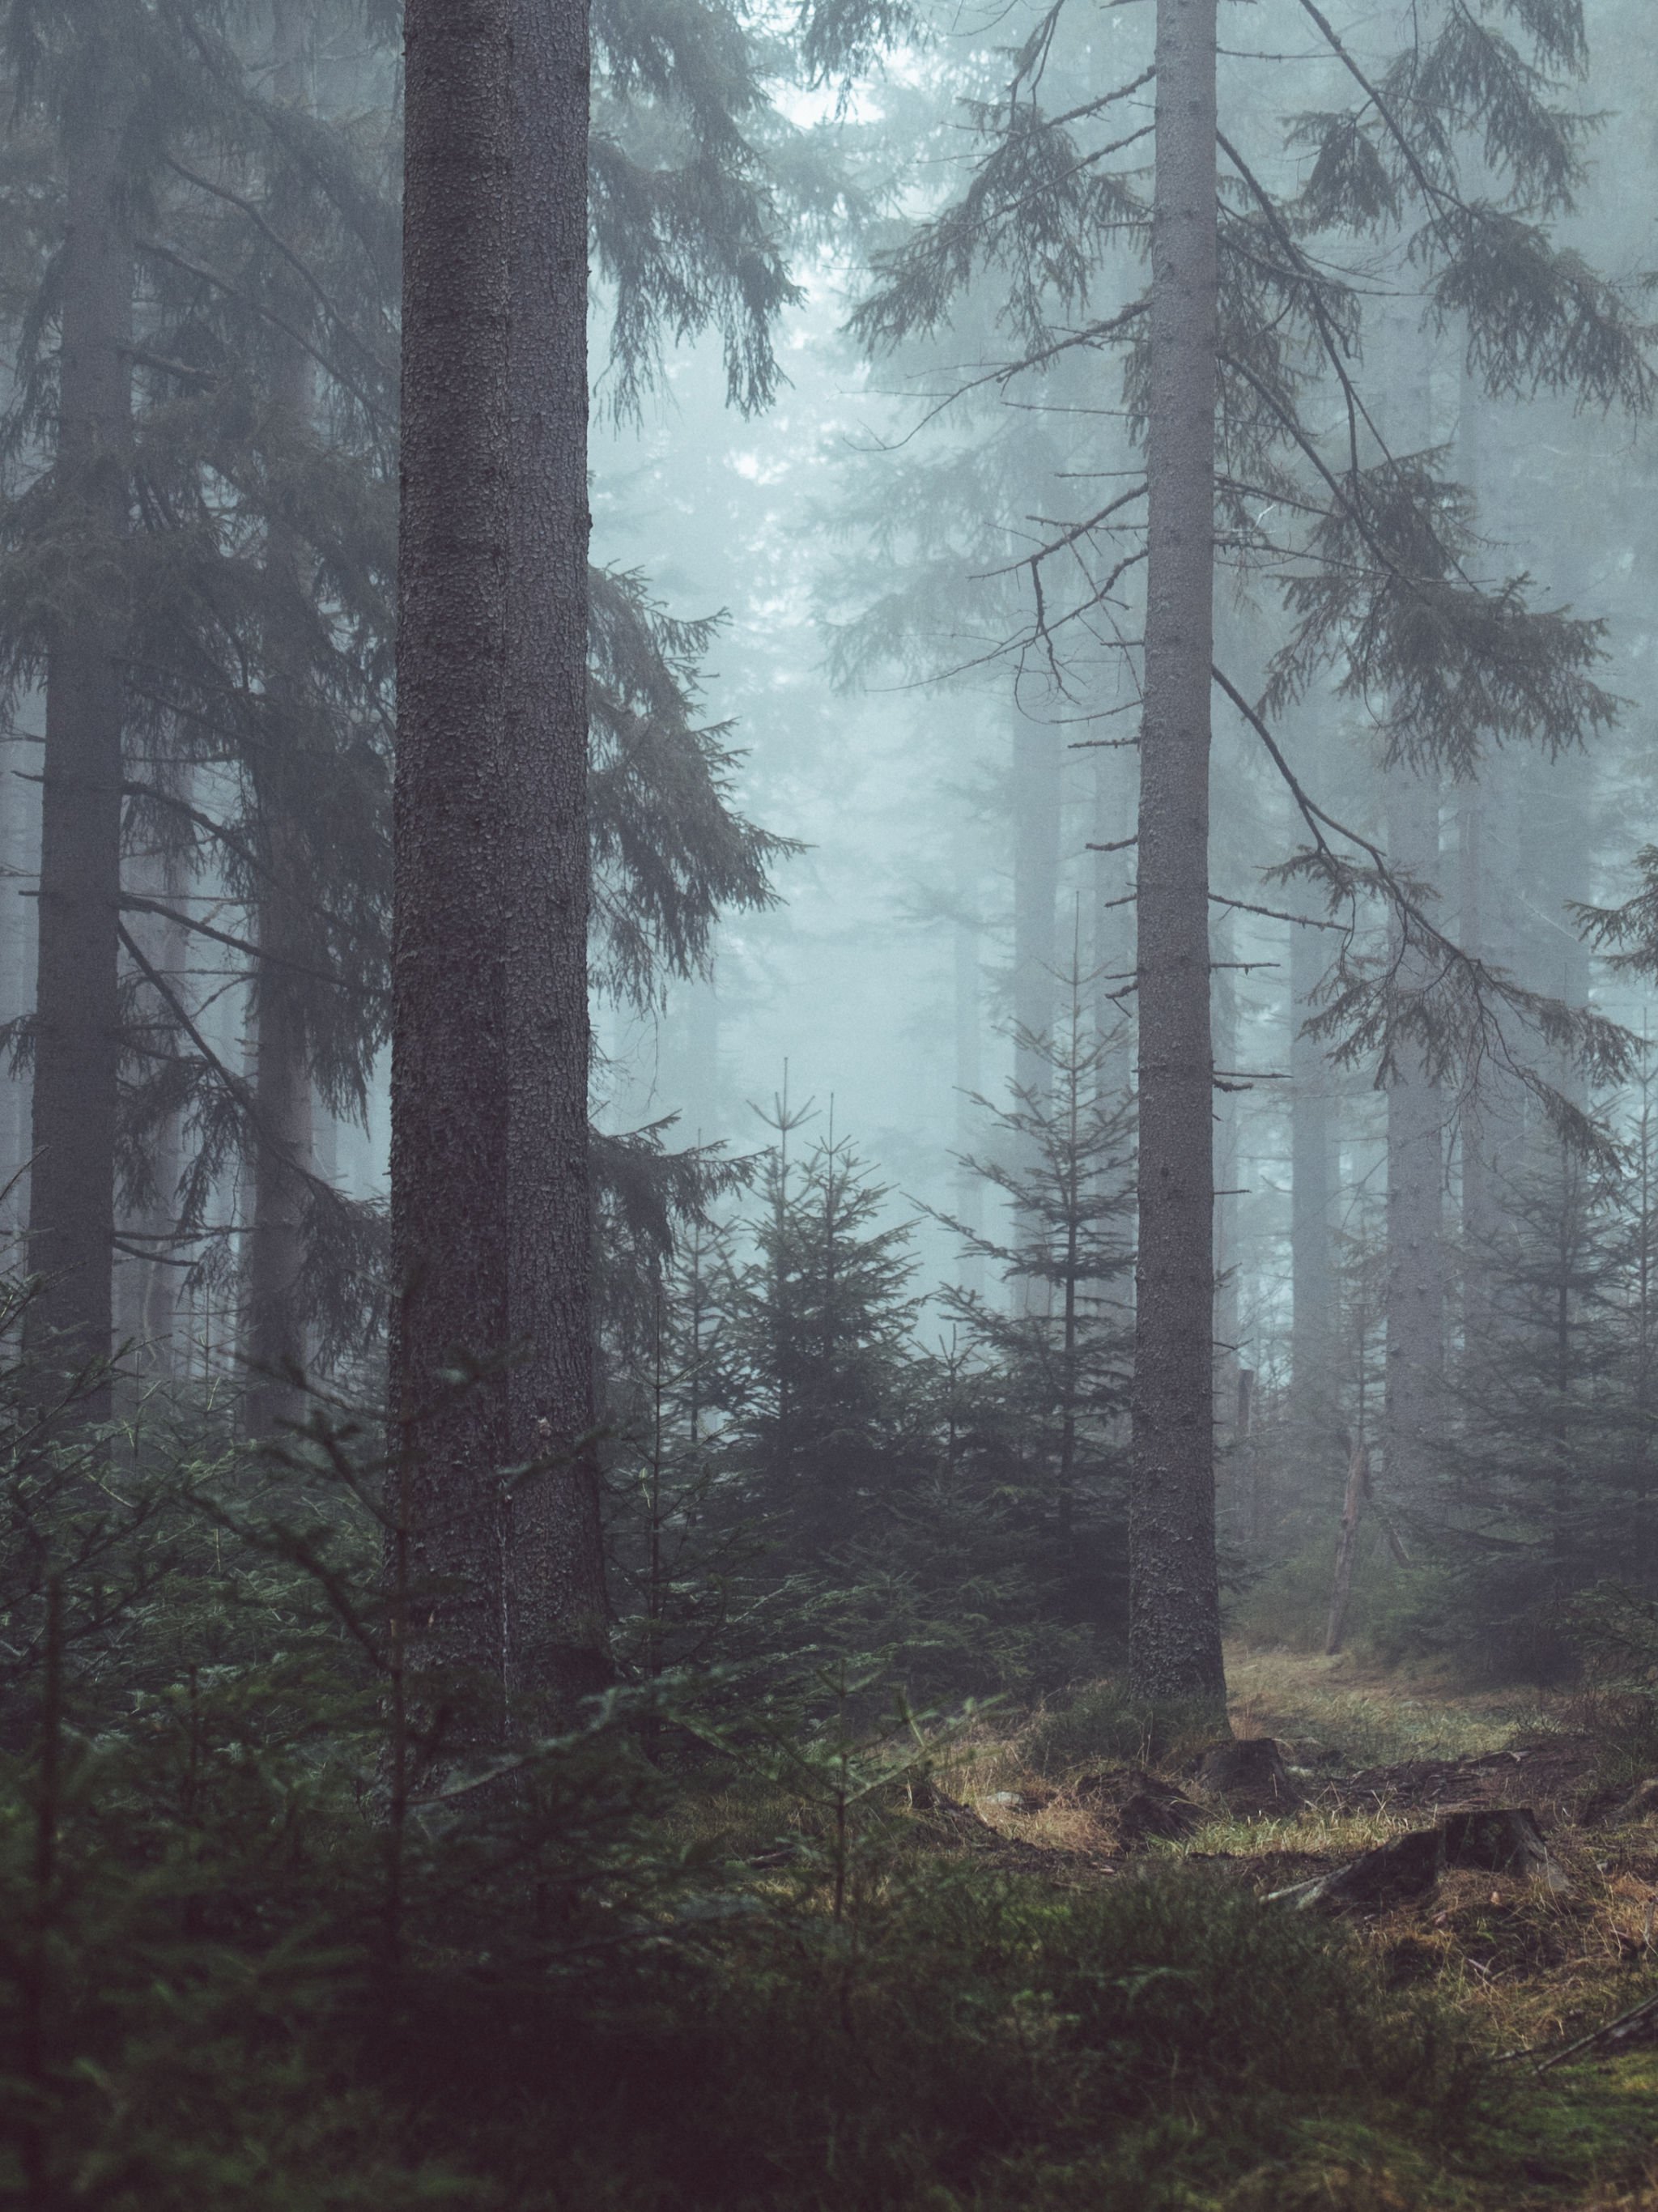 Misty Forest Wallpaper - iPhone, Android & Desktop Backgrounds